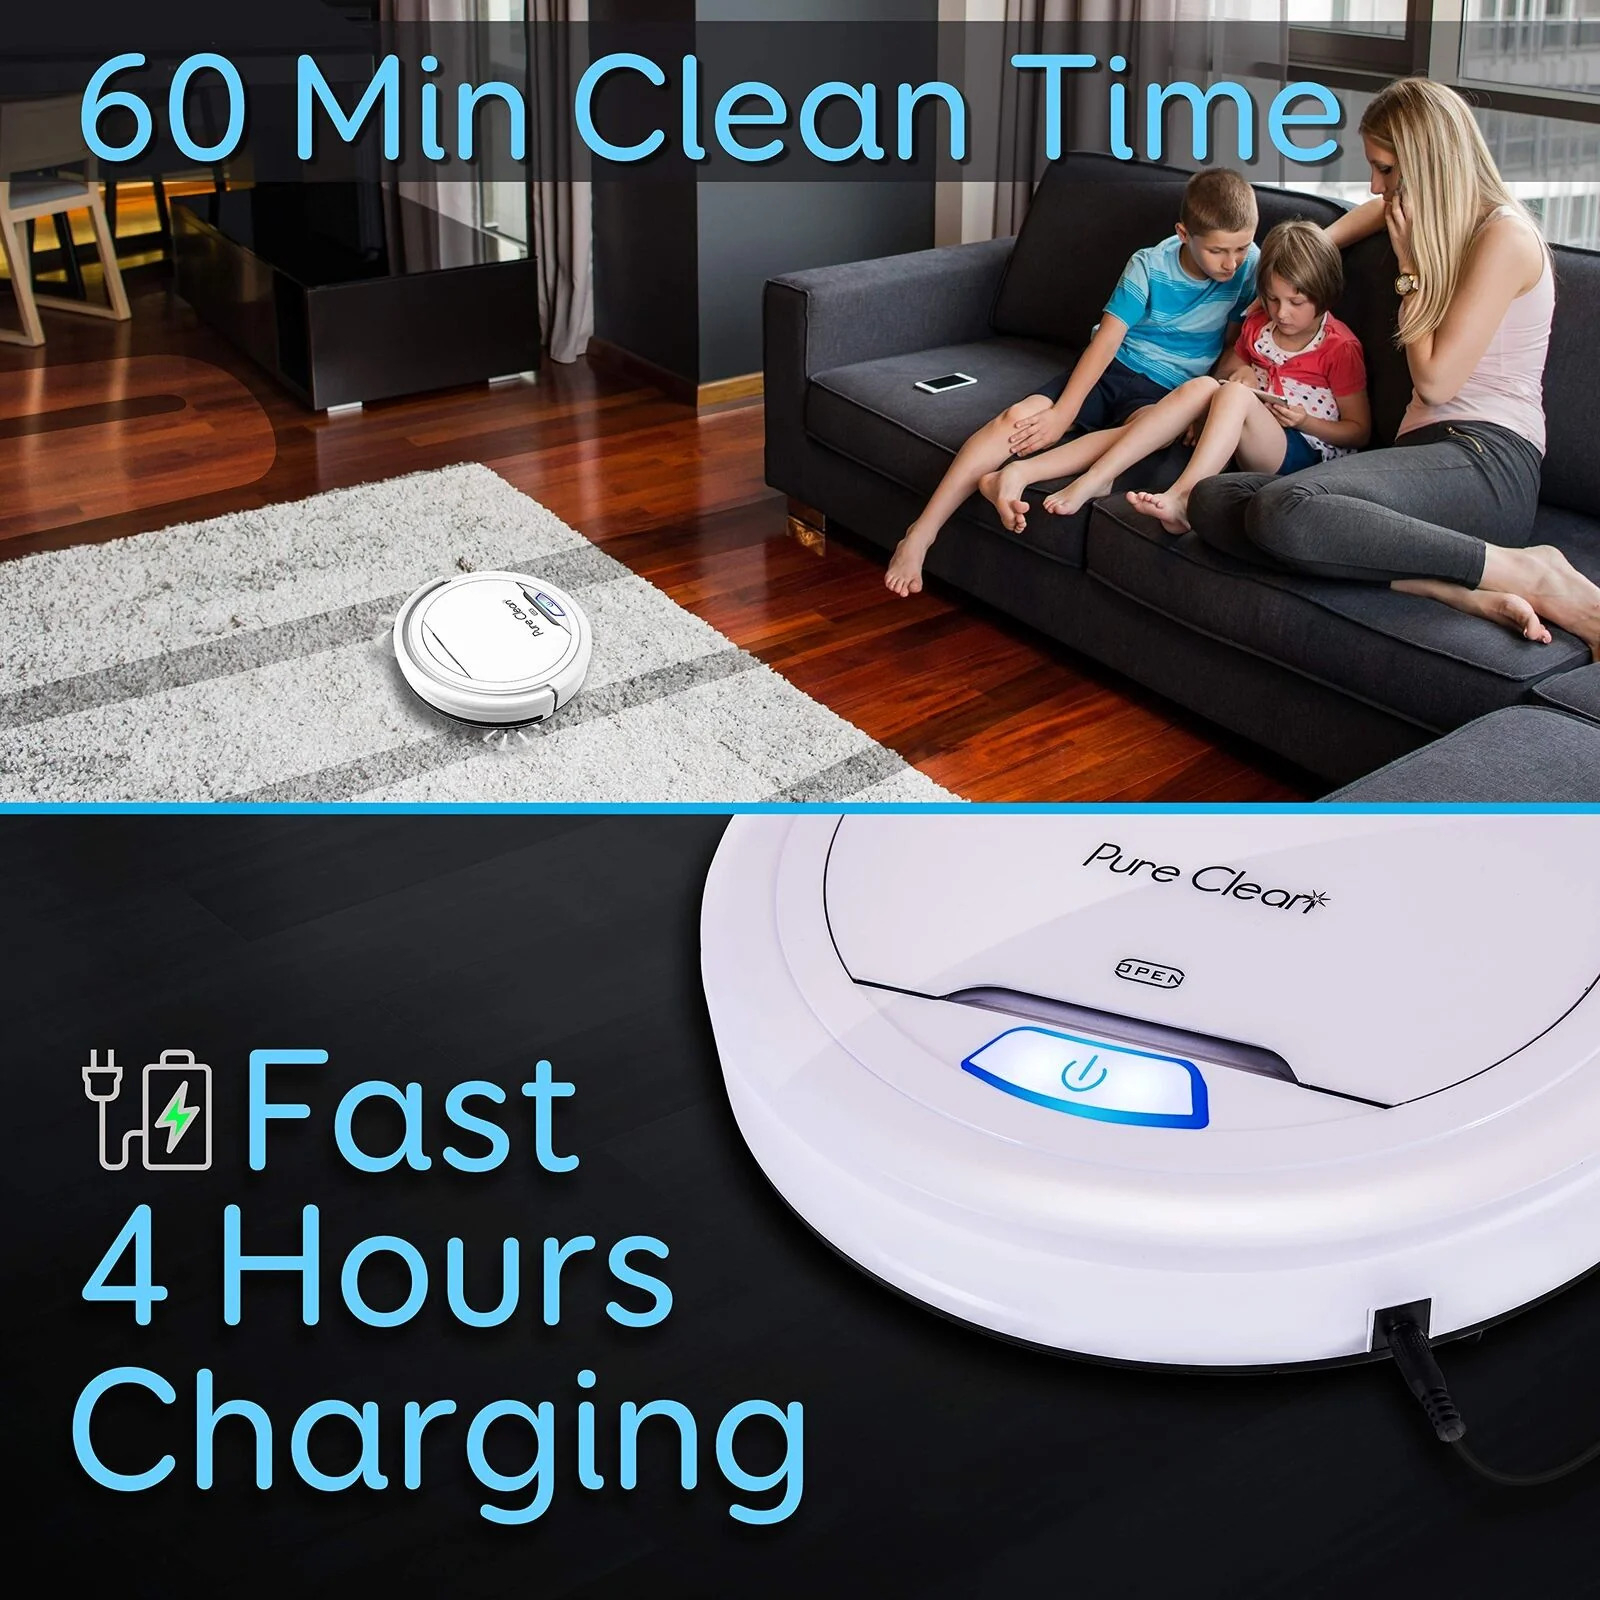 Pyle PureClean Smart Automatic Robot Vacuum Powerful Home Cleaning System, White - image 3 of 9